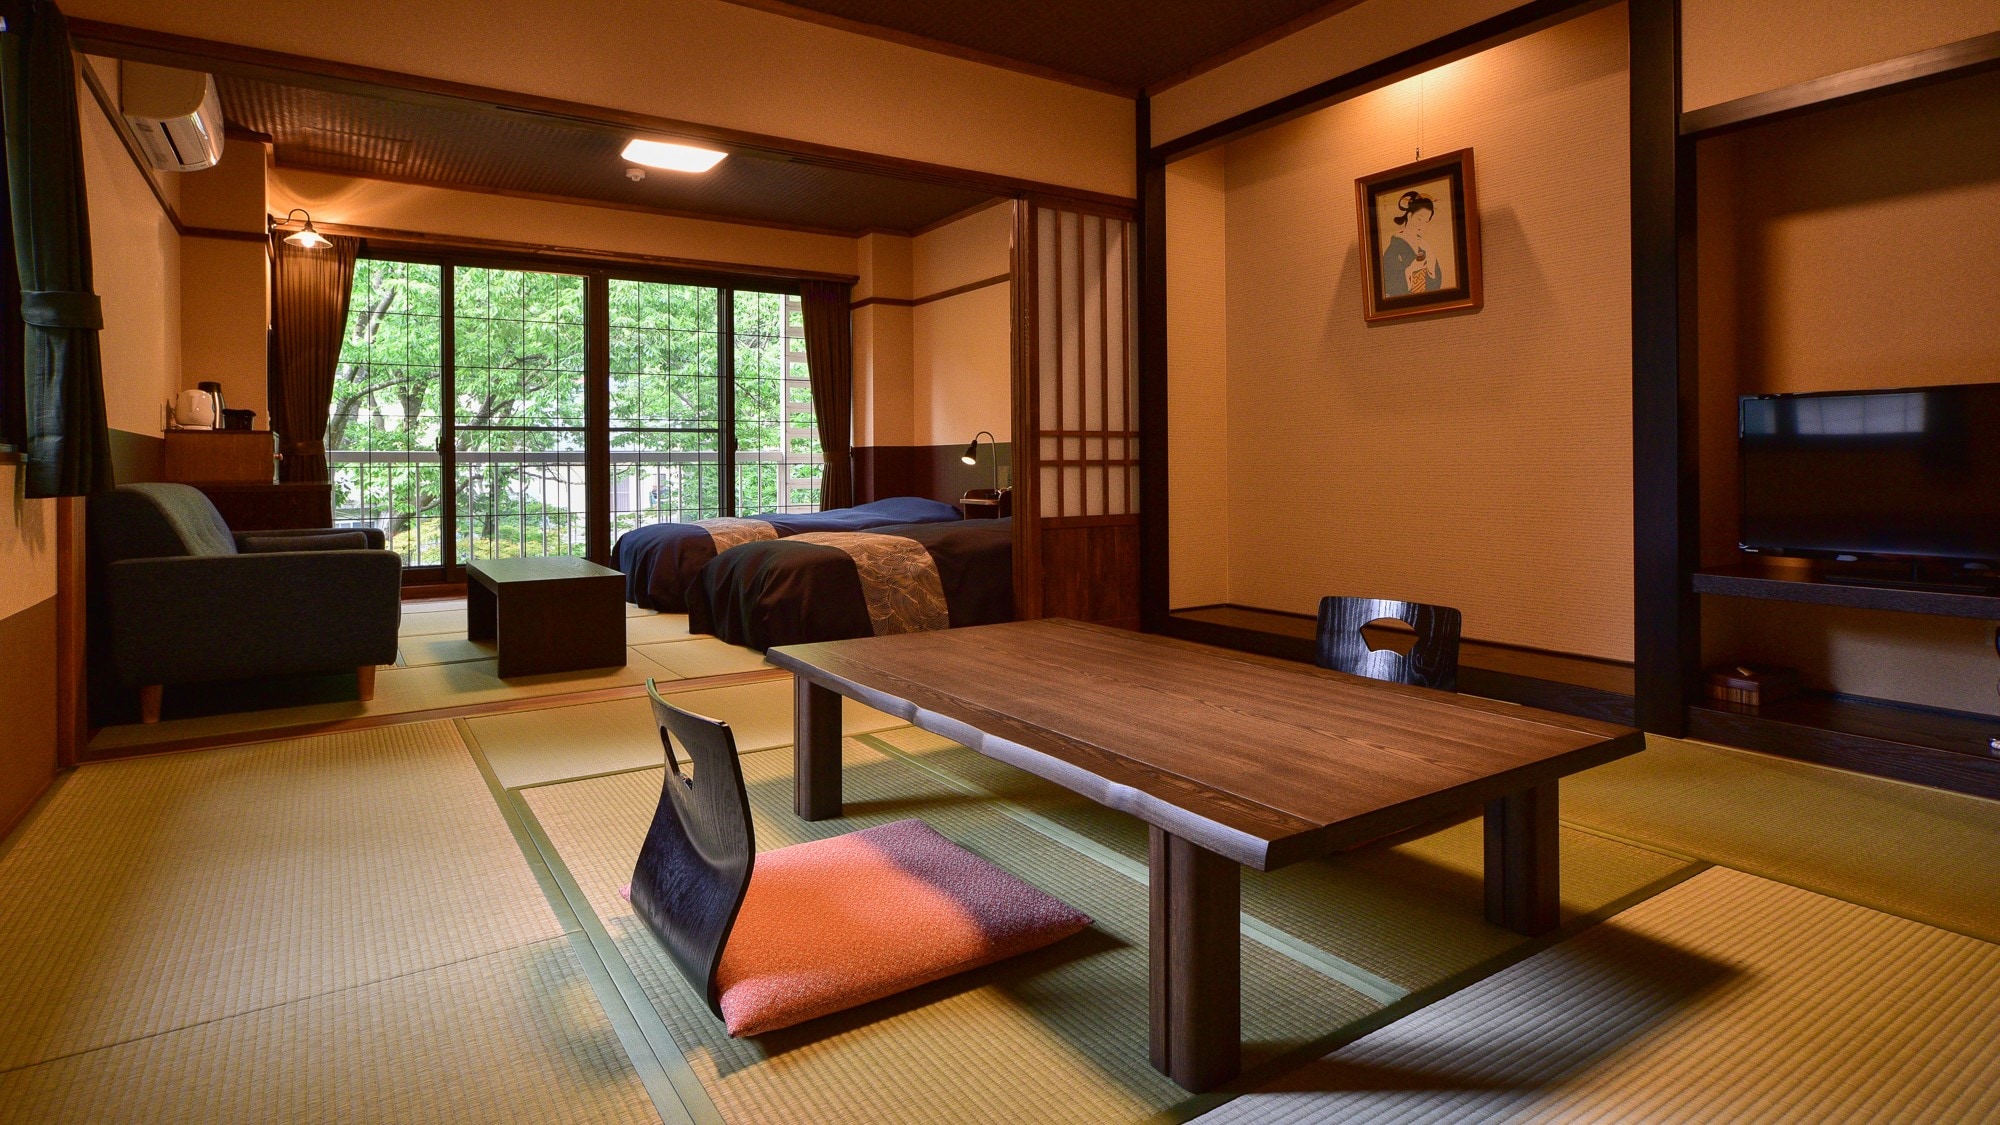 * Non-smoking [Japanese-Western style room with two rooms] Twin bedroom + Japanese-style room 10 tatami mats